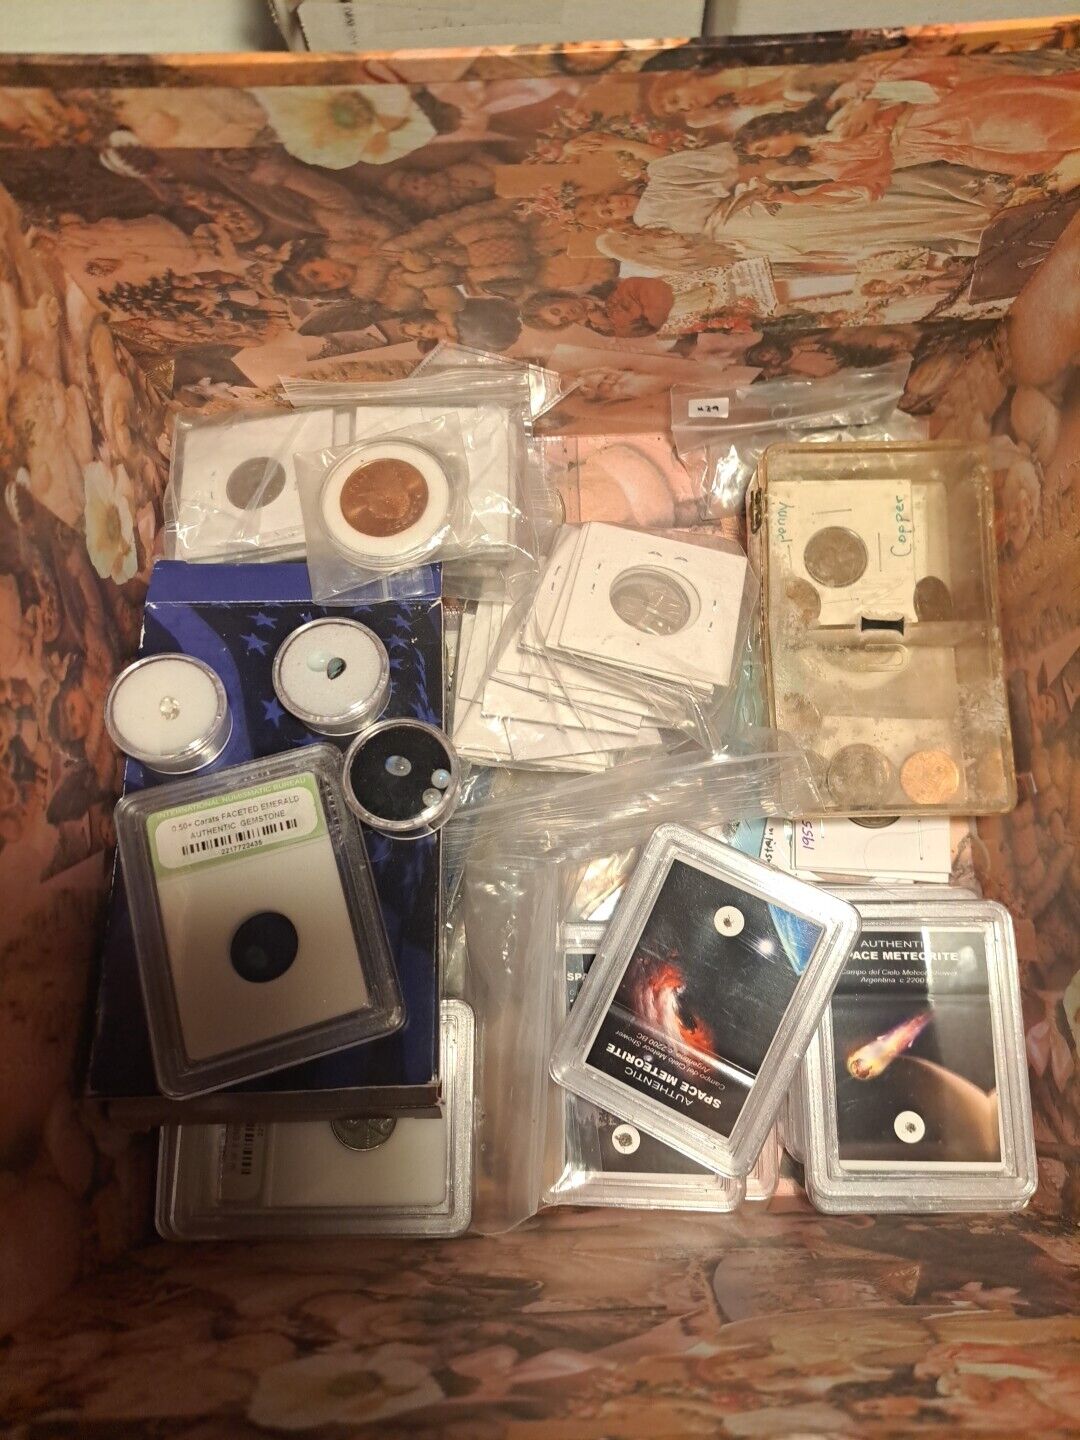 Surprise Grab Bag Of Collectibles..anything From Silver To Gems To Meteorites...